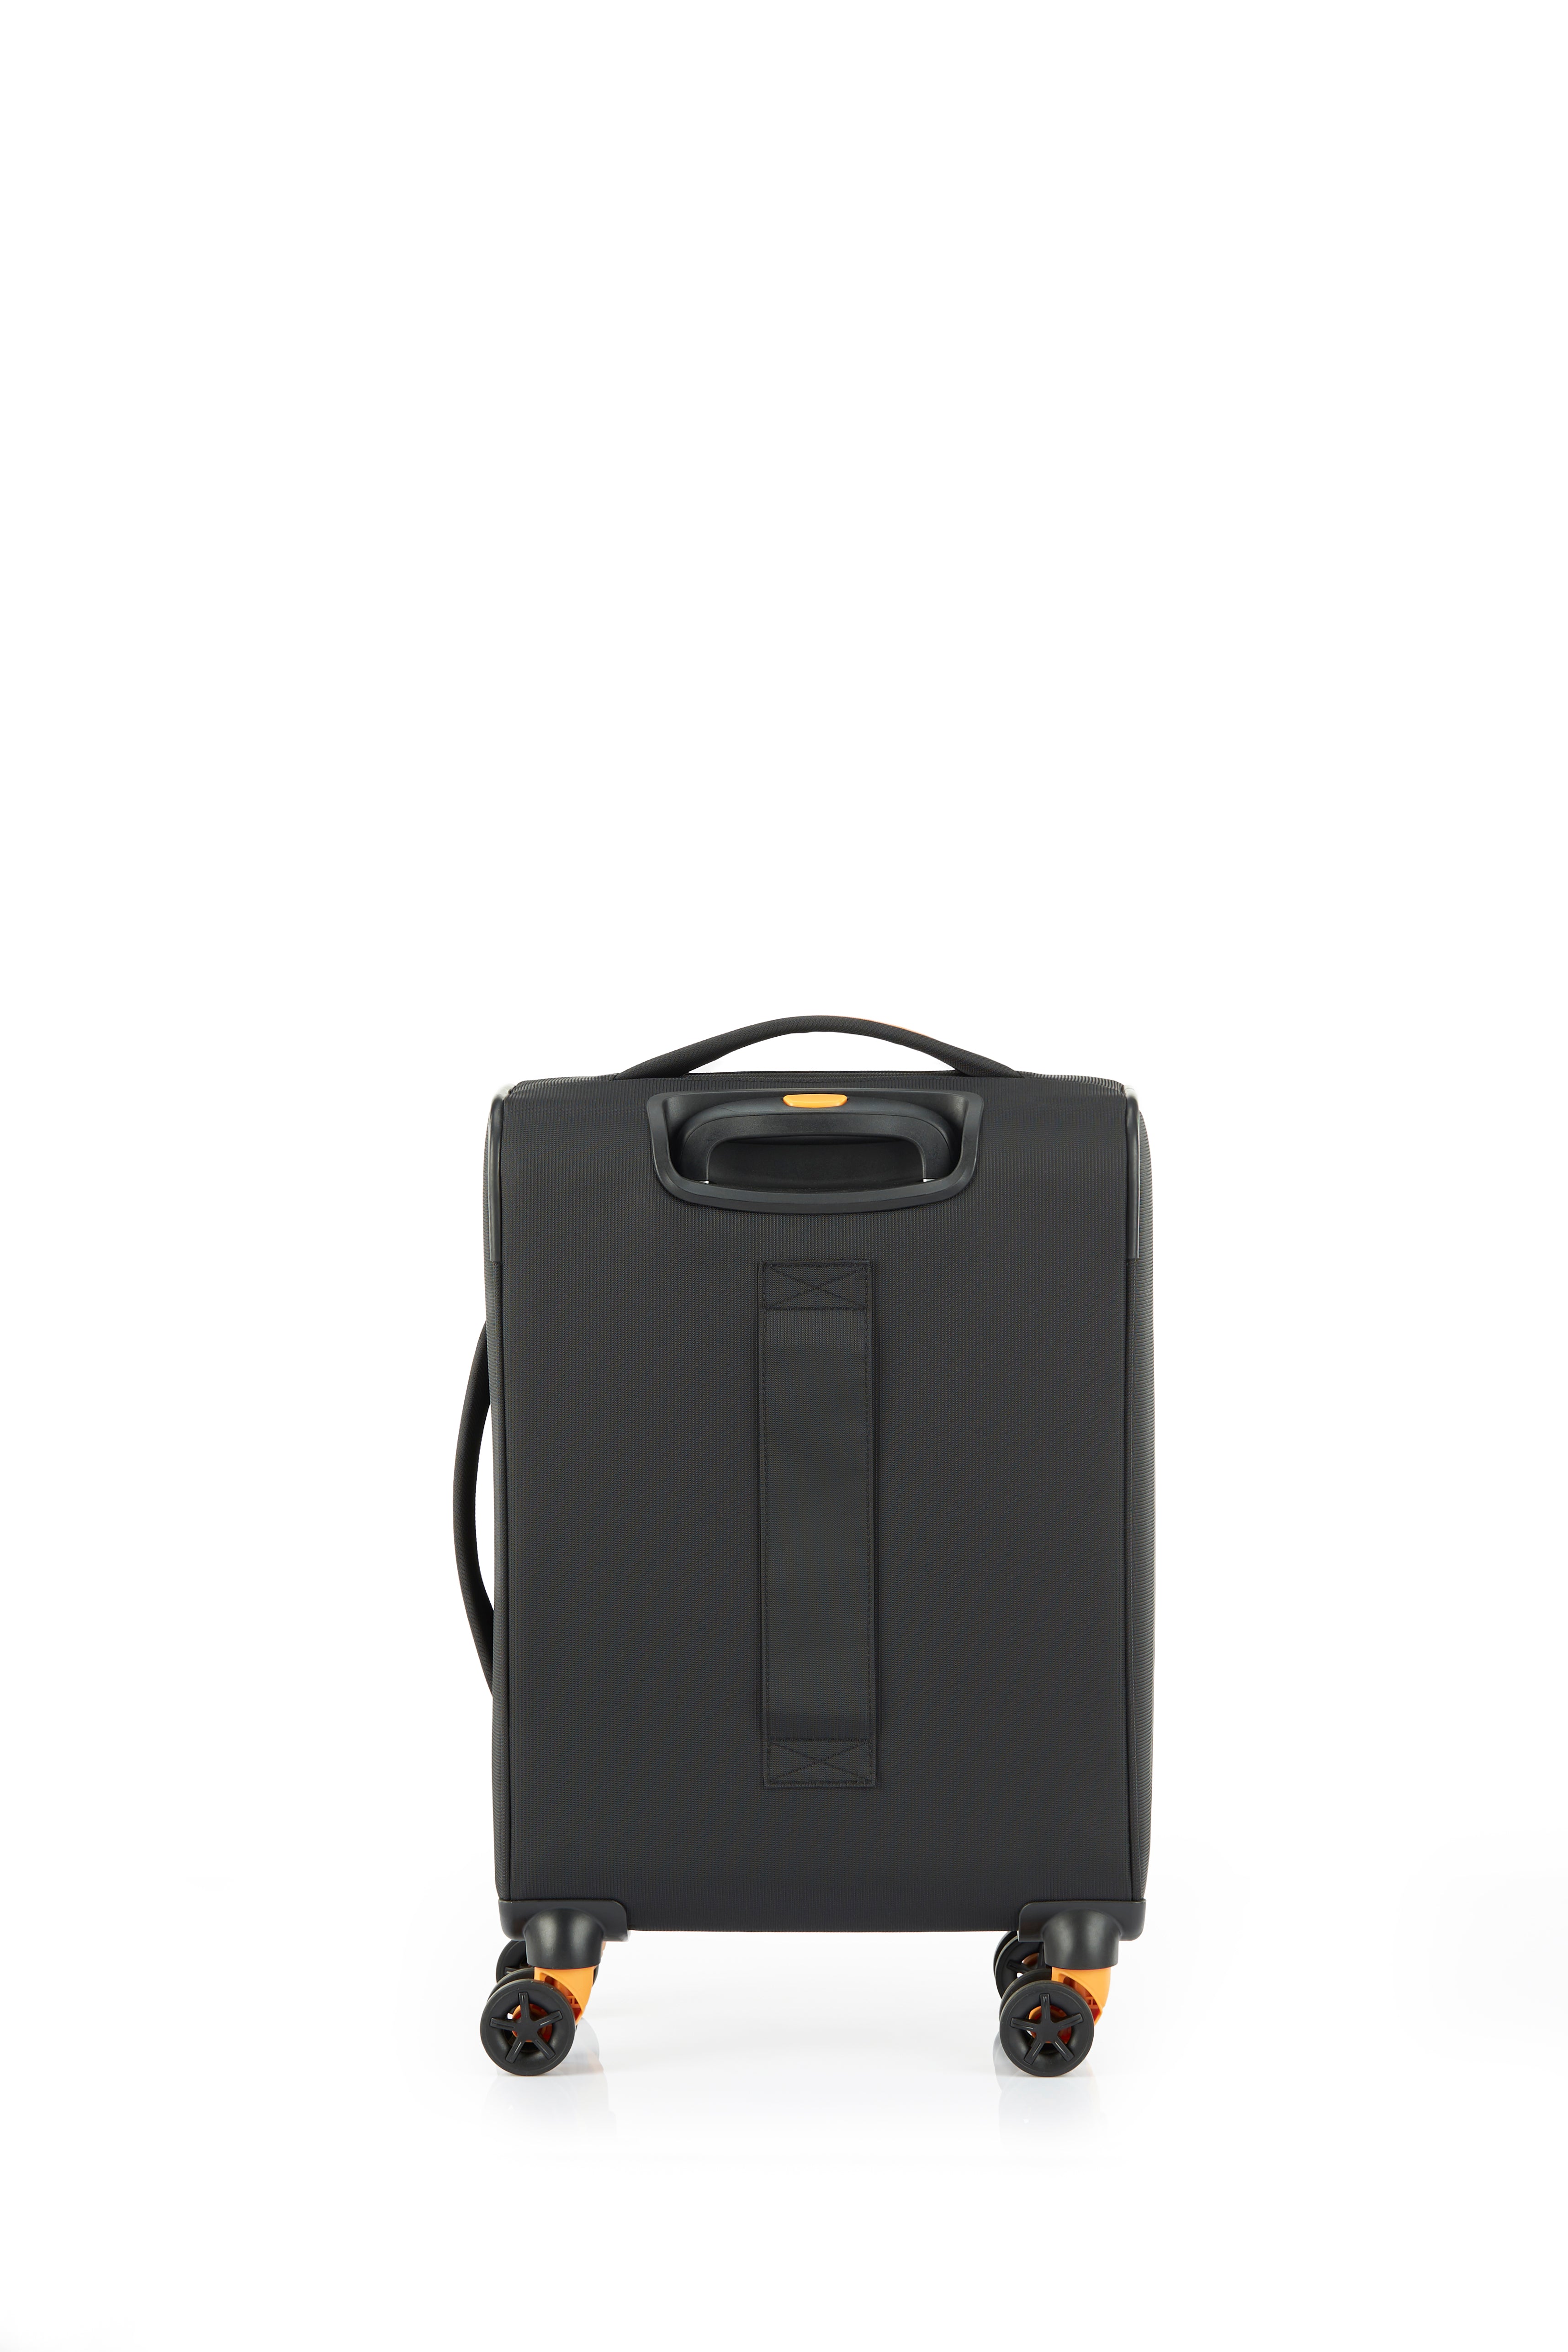 American Tourister - Applite ECO 55cm Small Suitcase - Black/Must-5